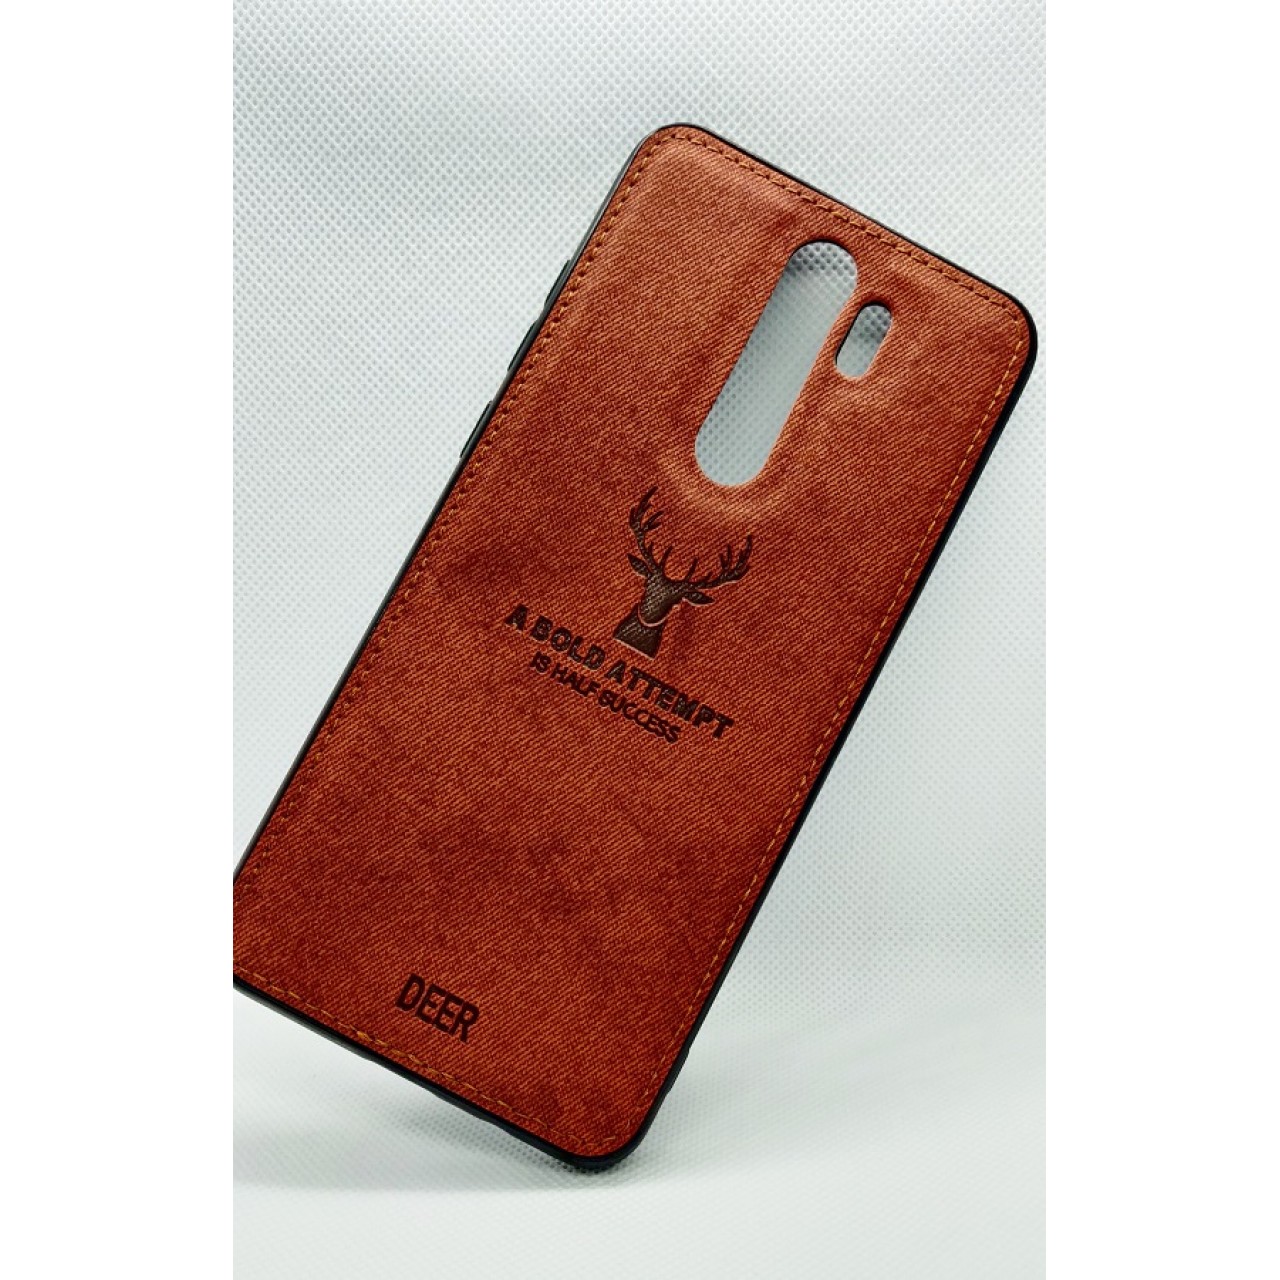 DEER CLOTH BACK CASE FOR XIAOMI REDMI NOTE 8 PRO - BROWN